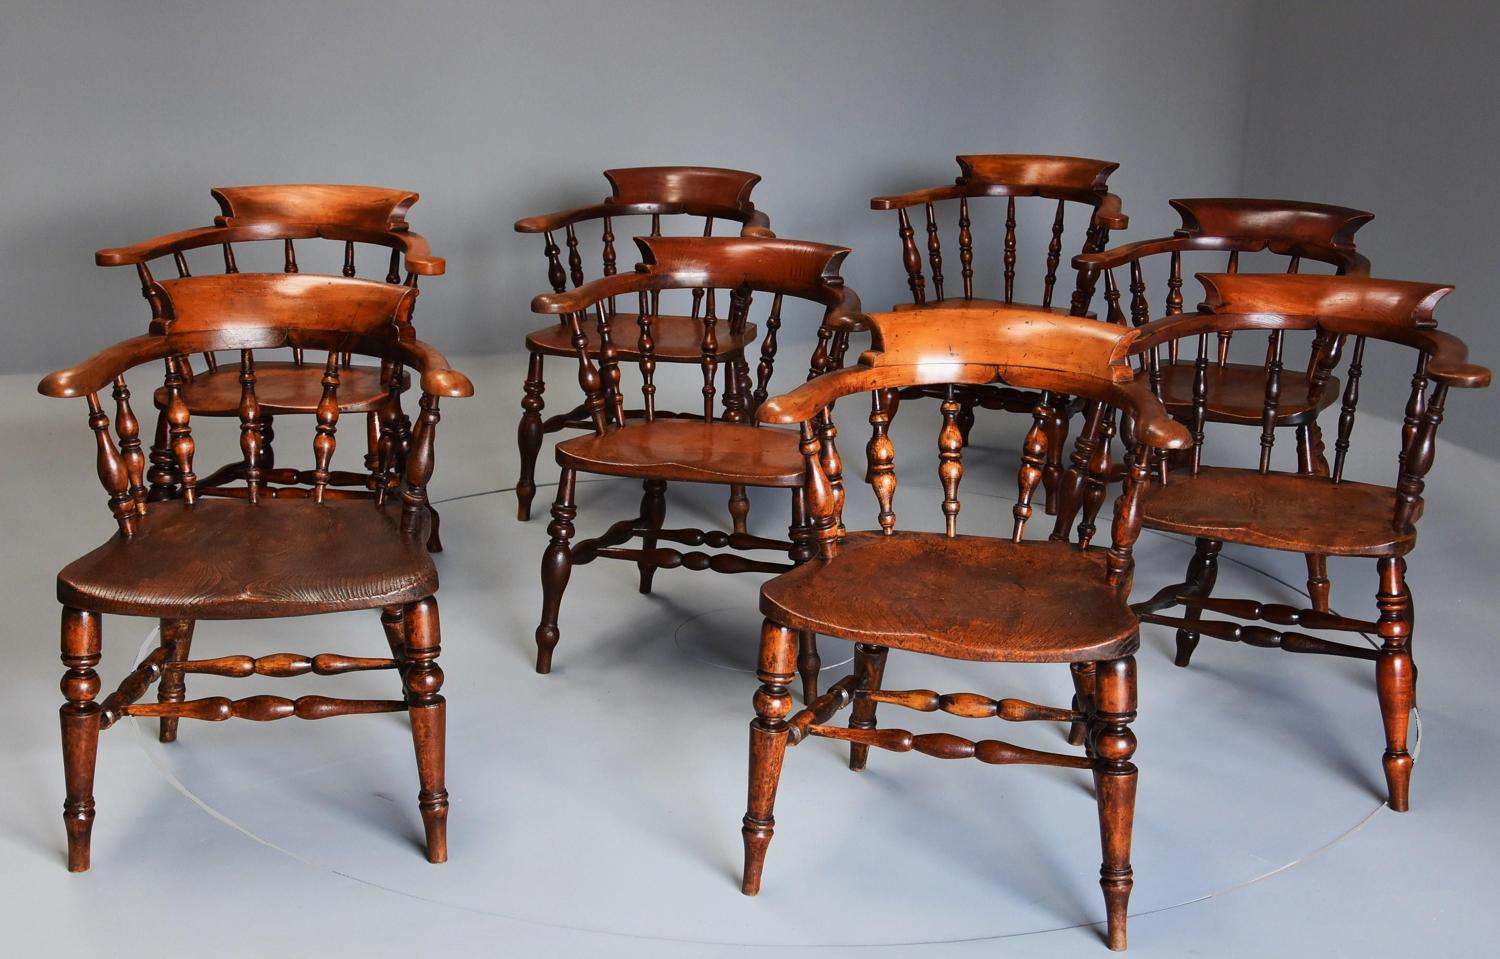 Matched set of eight 19thc Smokers bow chairs